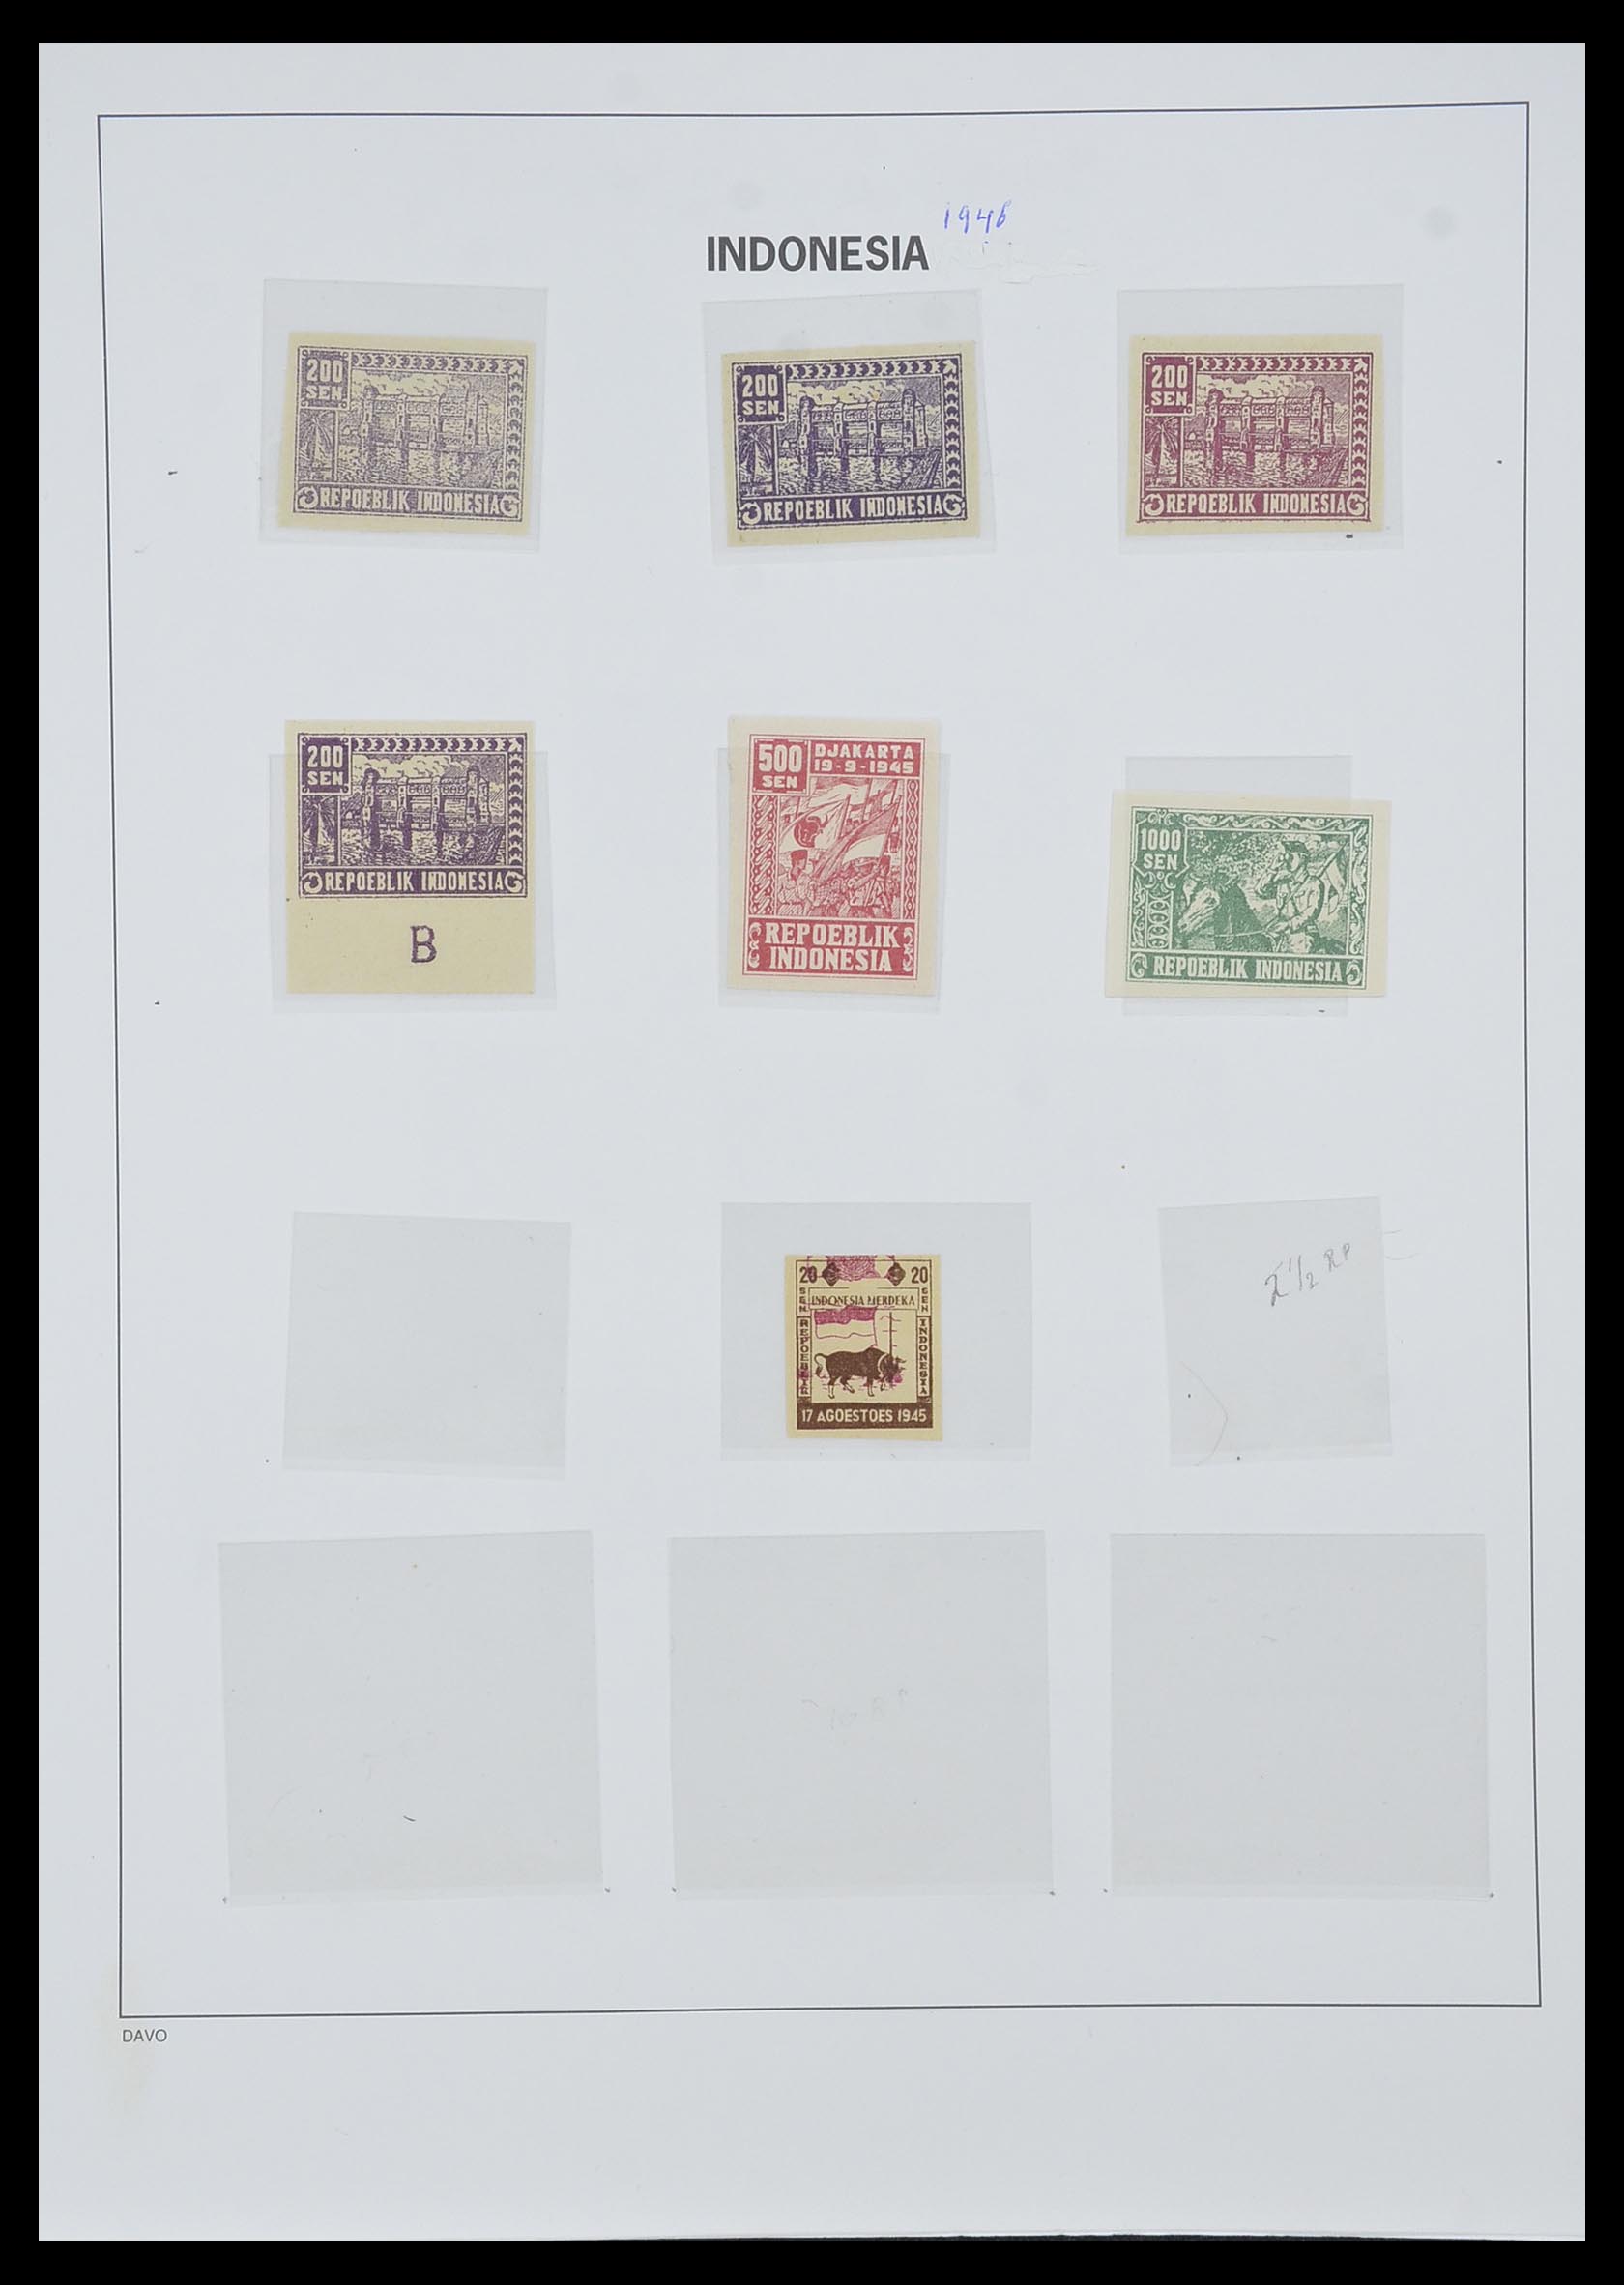 33988 008 - Stamp collection 33988 Vienna printings Indonesia.